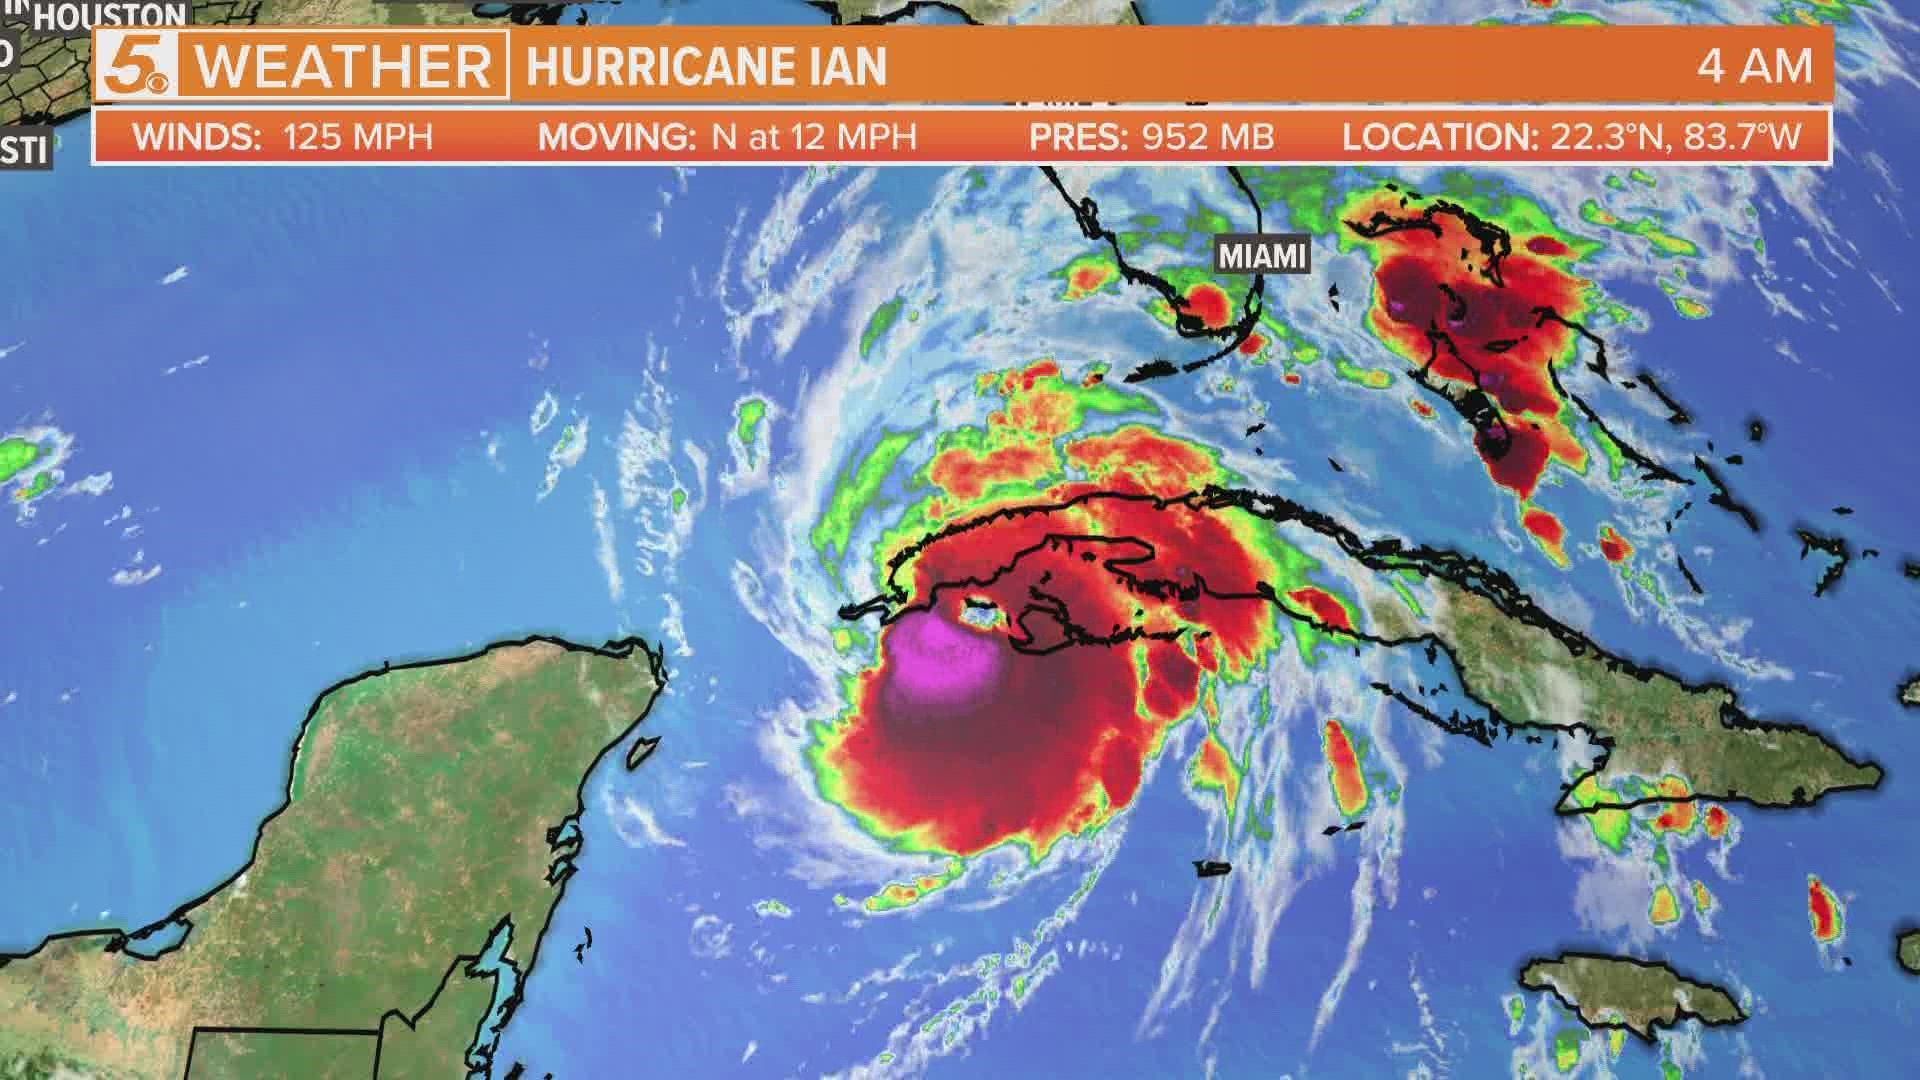 Hurricane Ian is headed towards Tampa and is expected to make landfall in the next day.